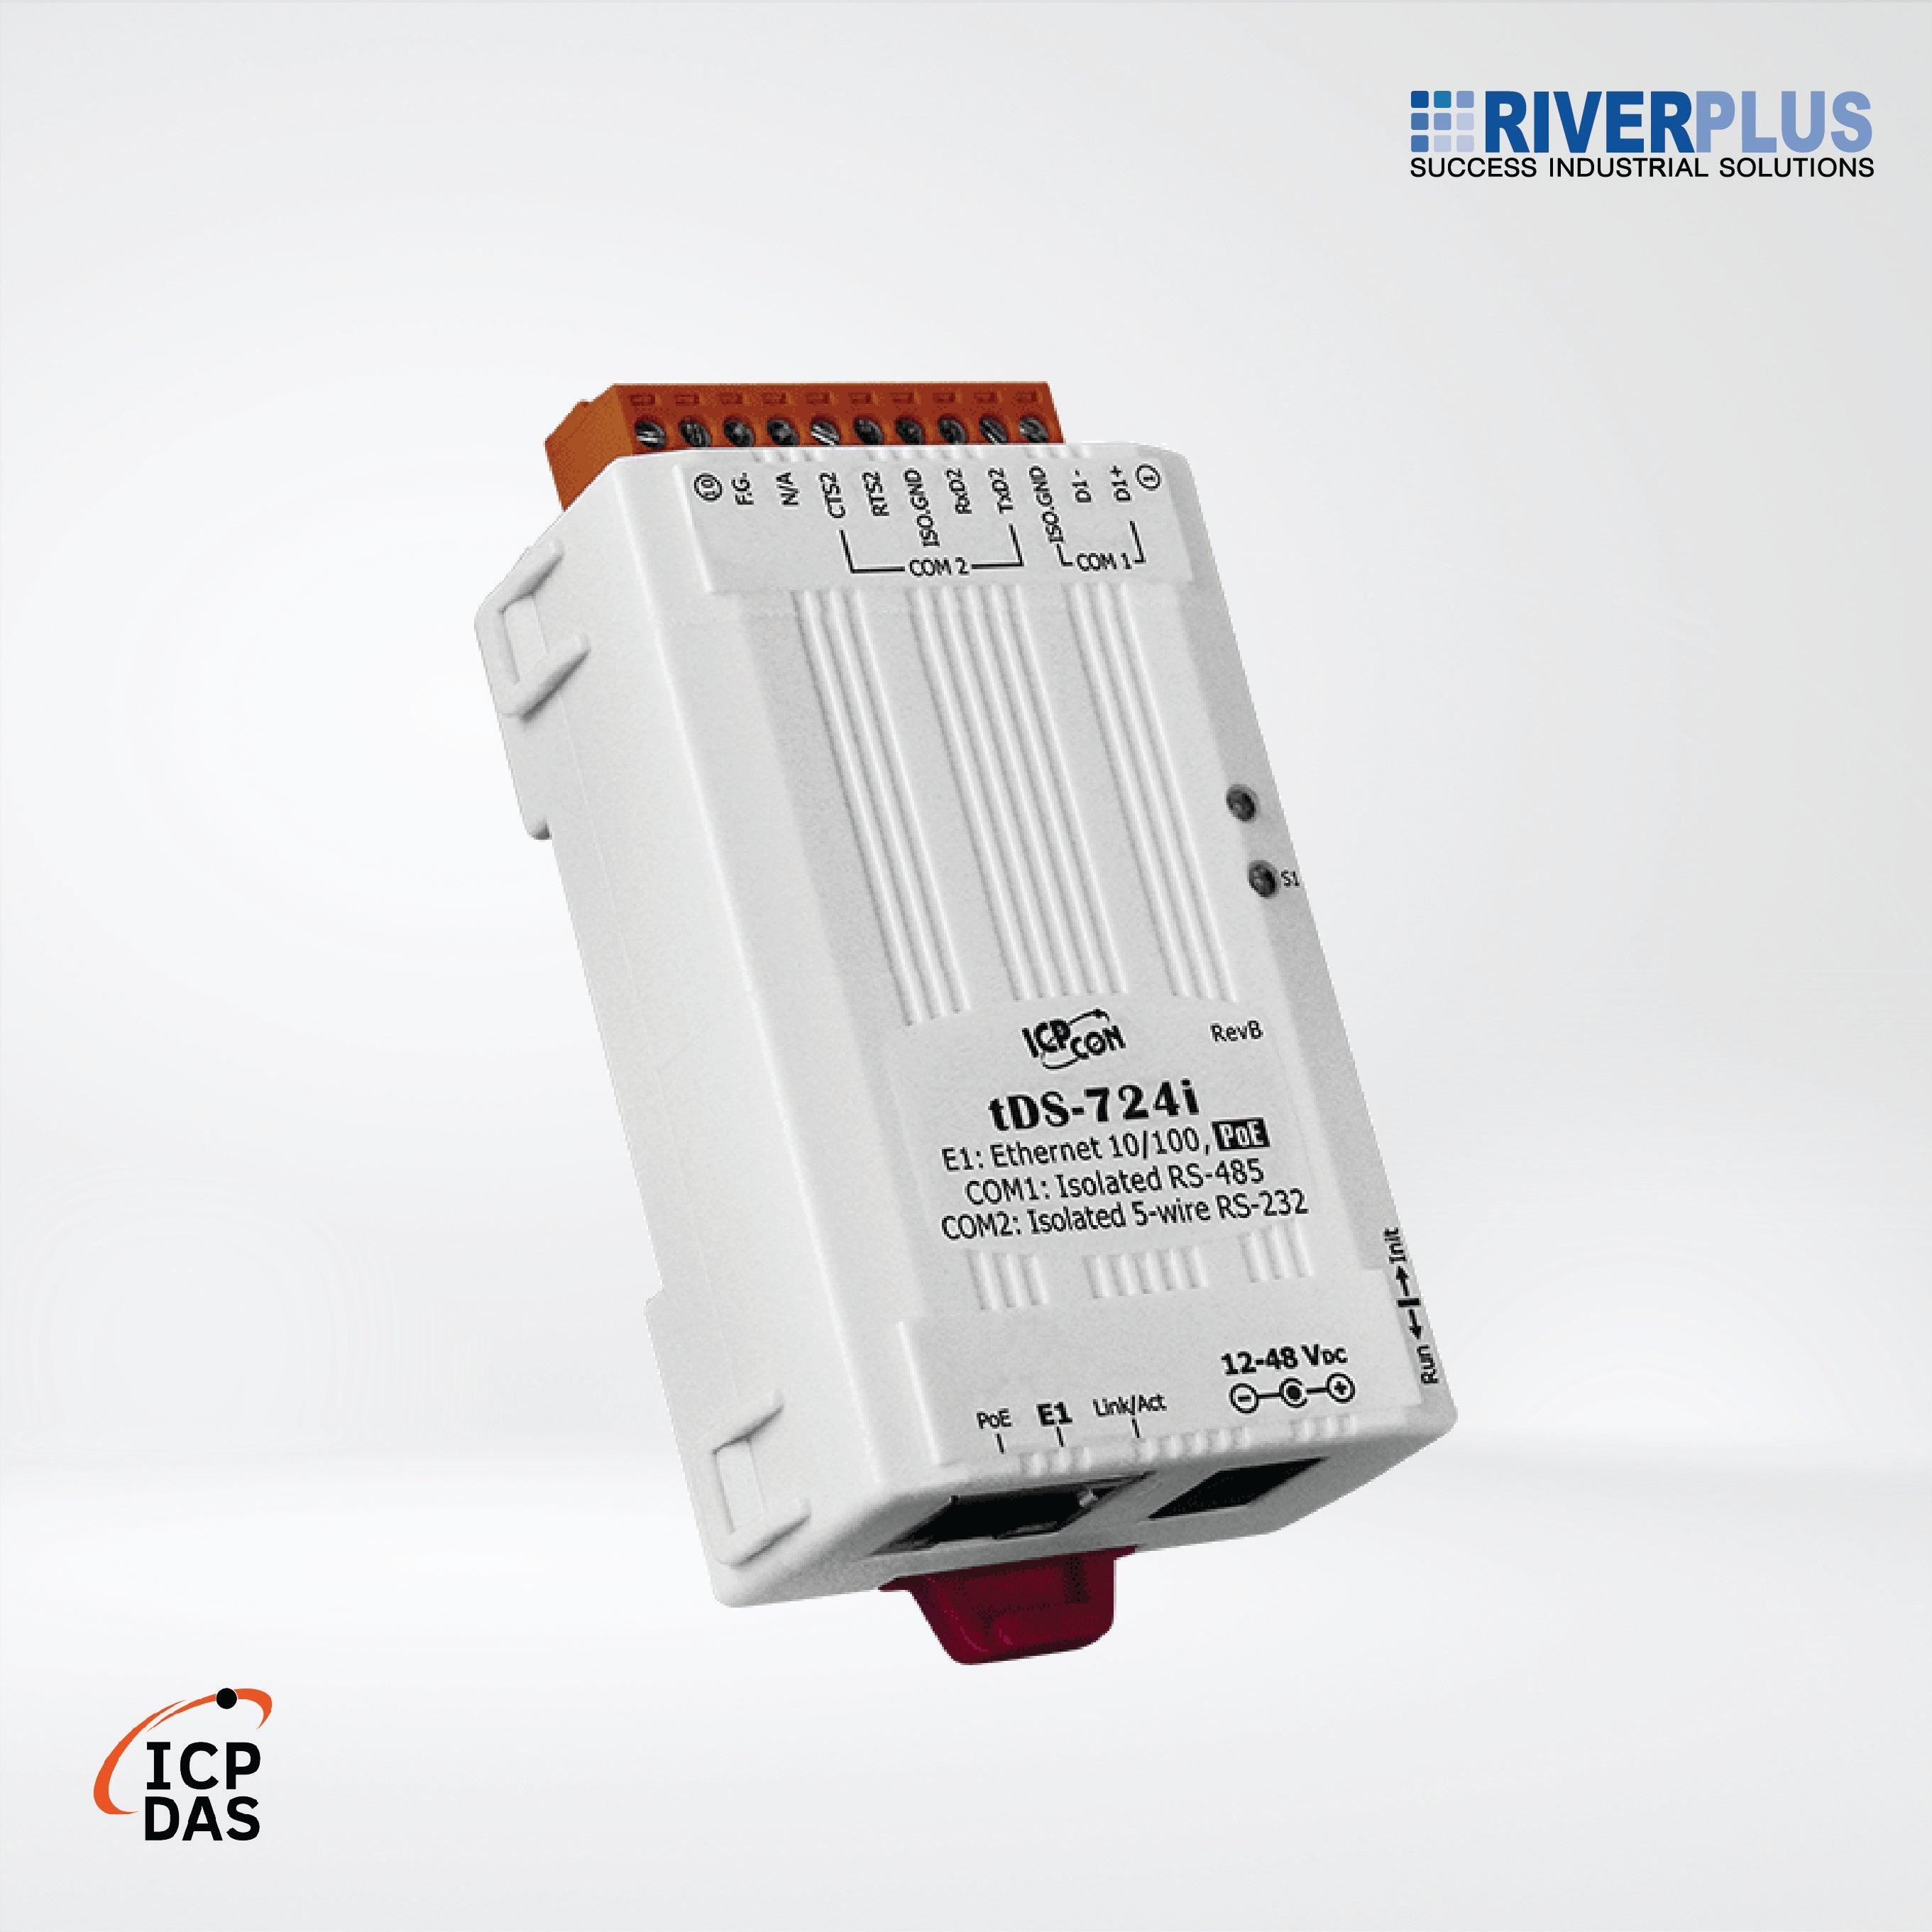 tDS-724i CR Tiny (1x Isolated RS-232 and 1x Isolated RS-485) Serial-to-Ethernet Device Server with PoE - Riverplus